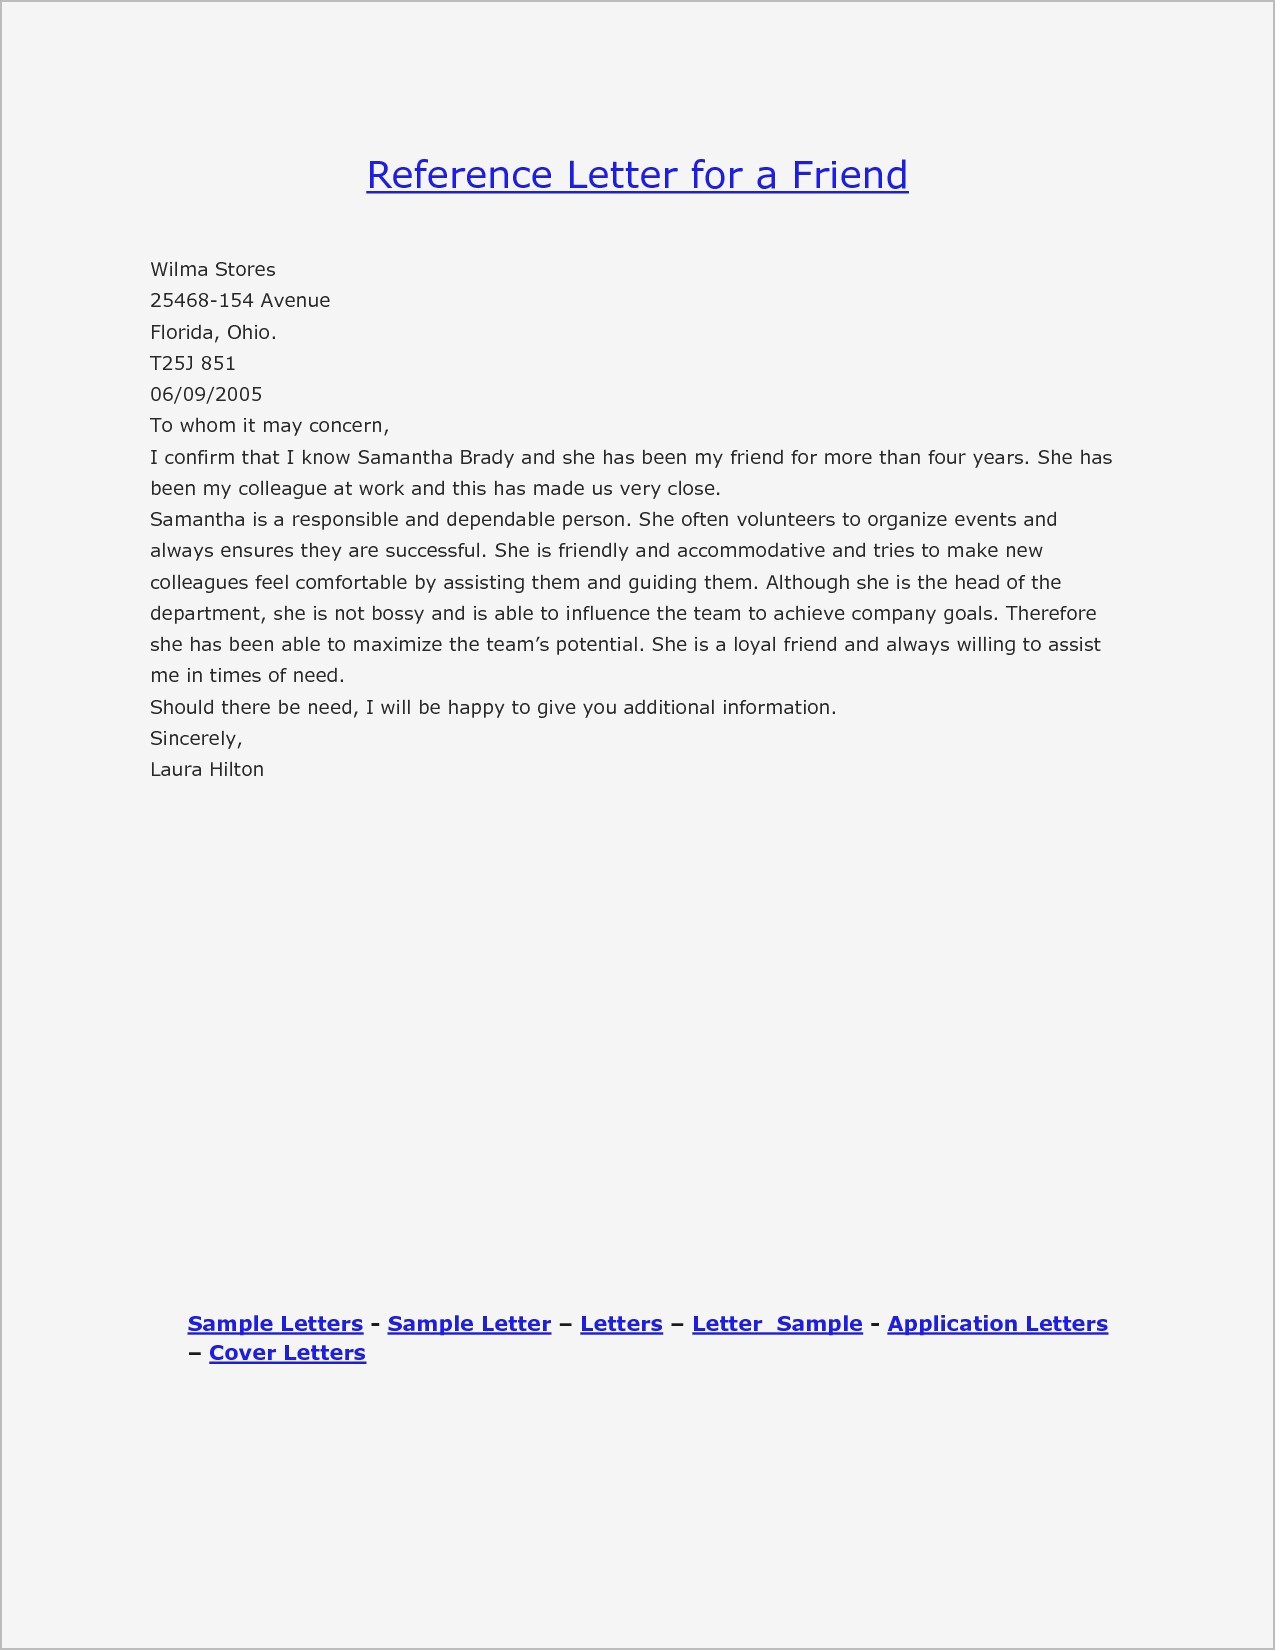 Personal Reference Letter Friend @valid Save Best New Refrence 